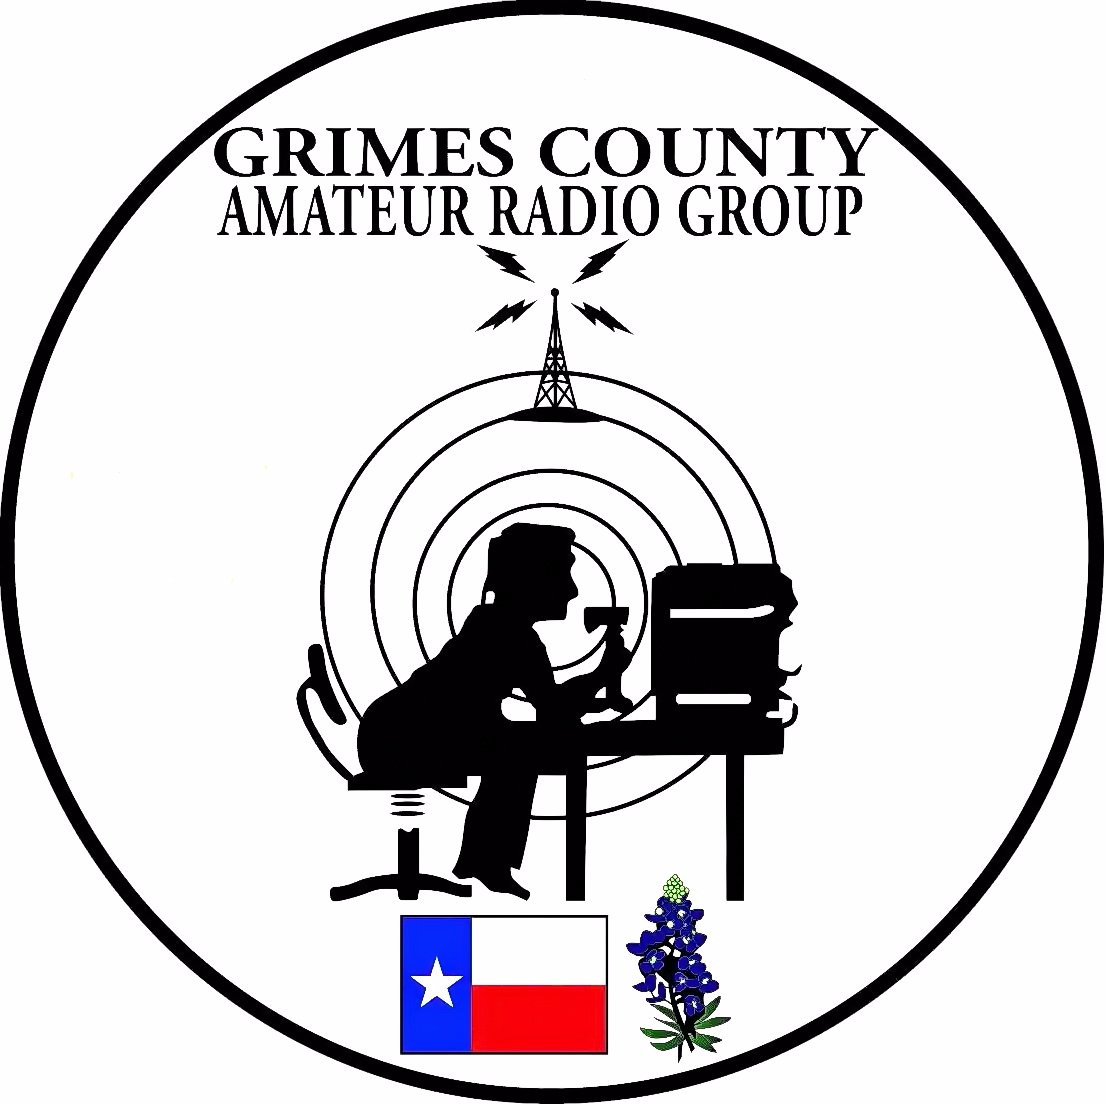 Grimes County Amateur Radio Group serving amateur radio and our community since 2016! We provide monthly meetings, membership, training, emergency preparedness